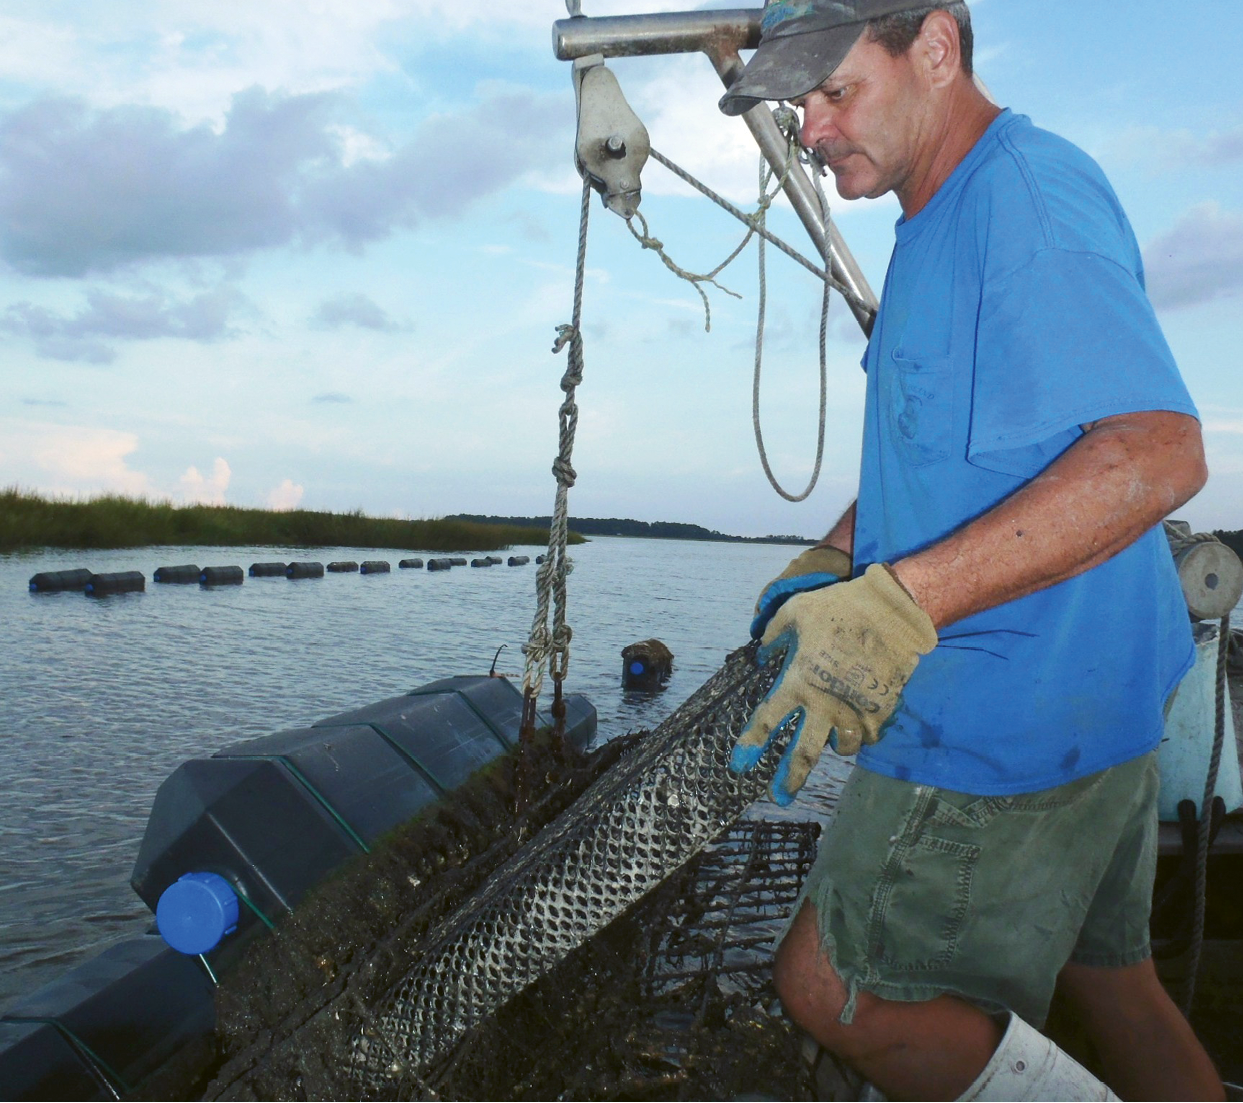 Frank Roberts of Lady’s Island Oyster launched South Carolina’s first and only oyster hatchery (above left); in addition to growing his own singles in the deliciously high salinity of Beaufort’s tidal estuaries, he supplies growers up and down the coast with baby oyster seed.